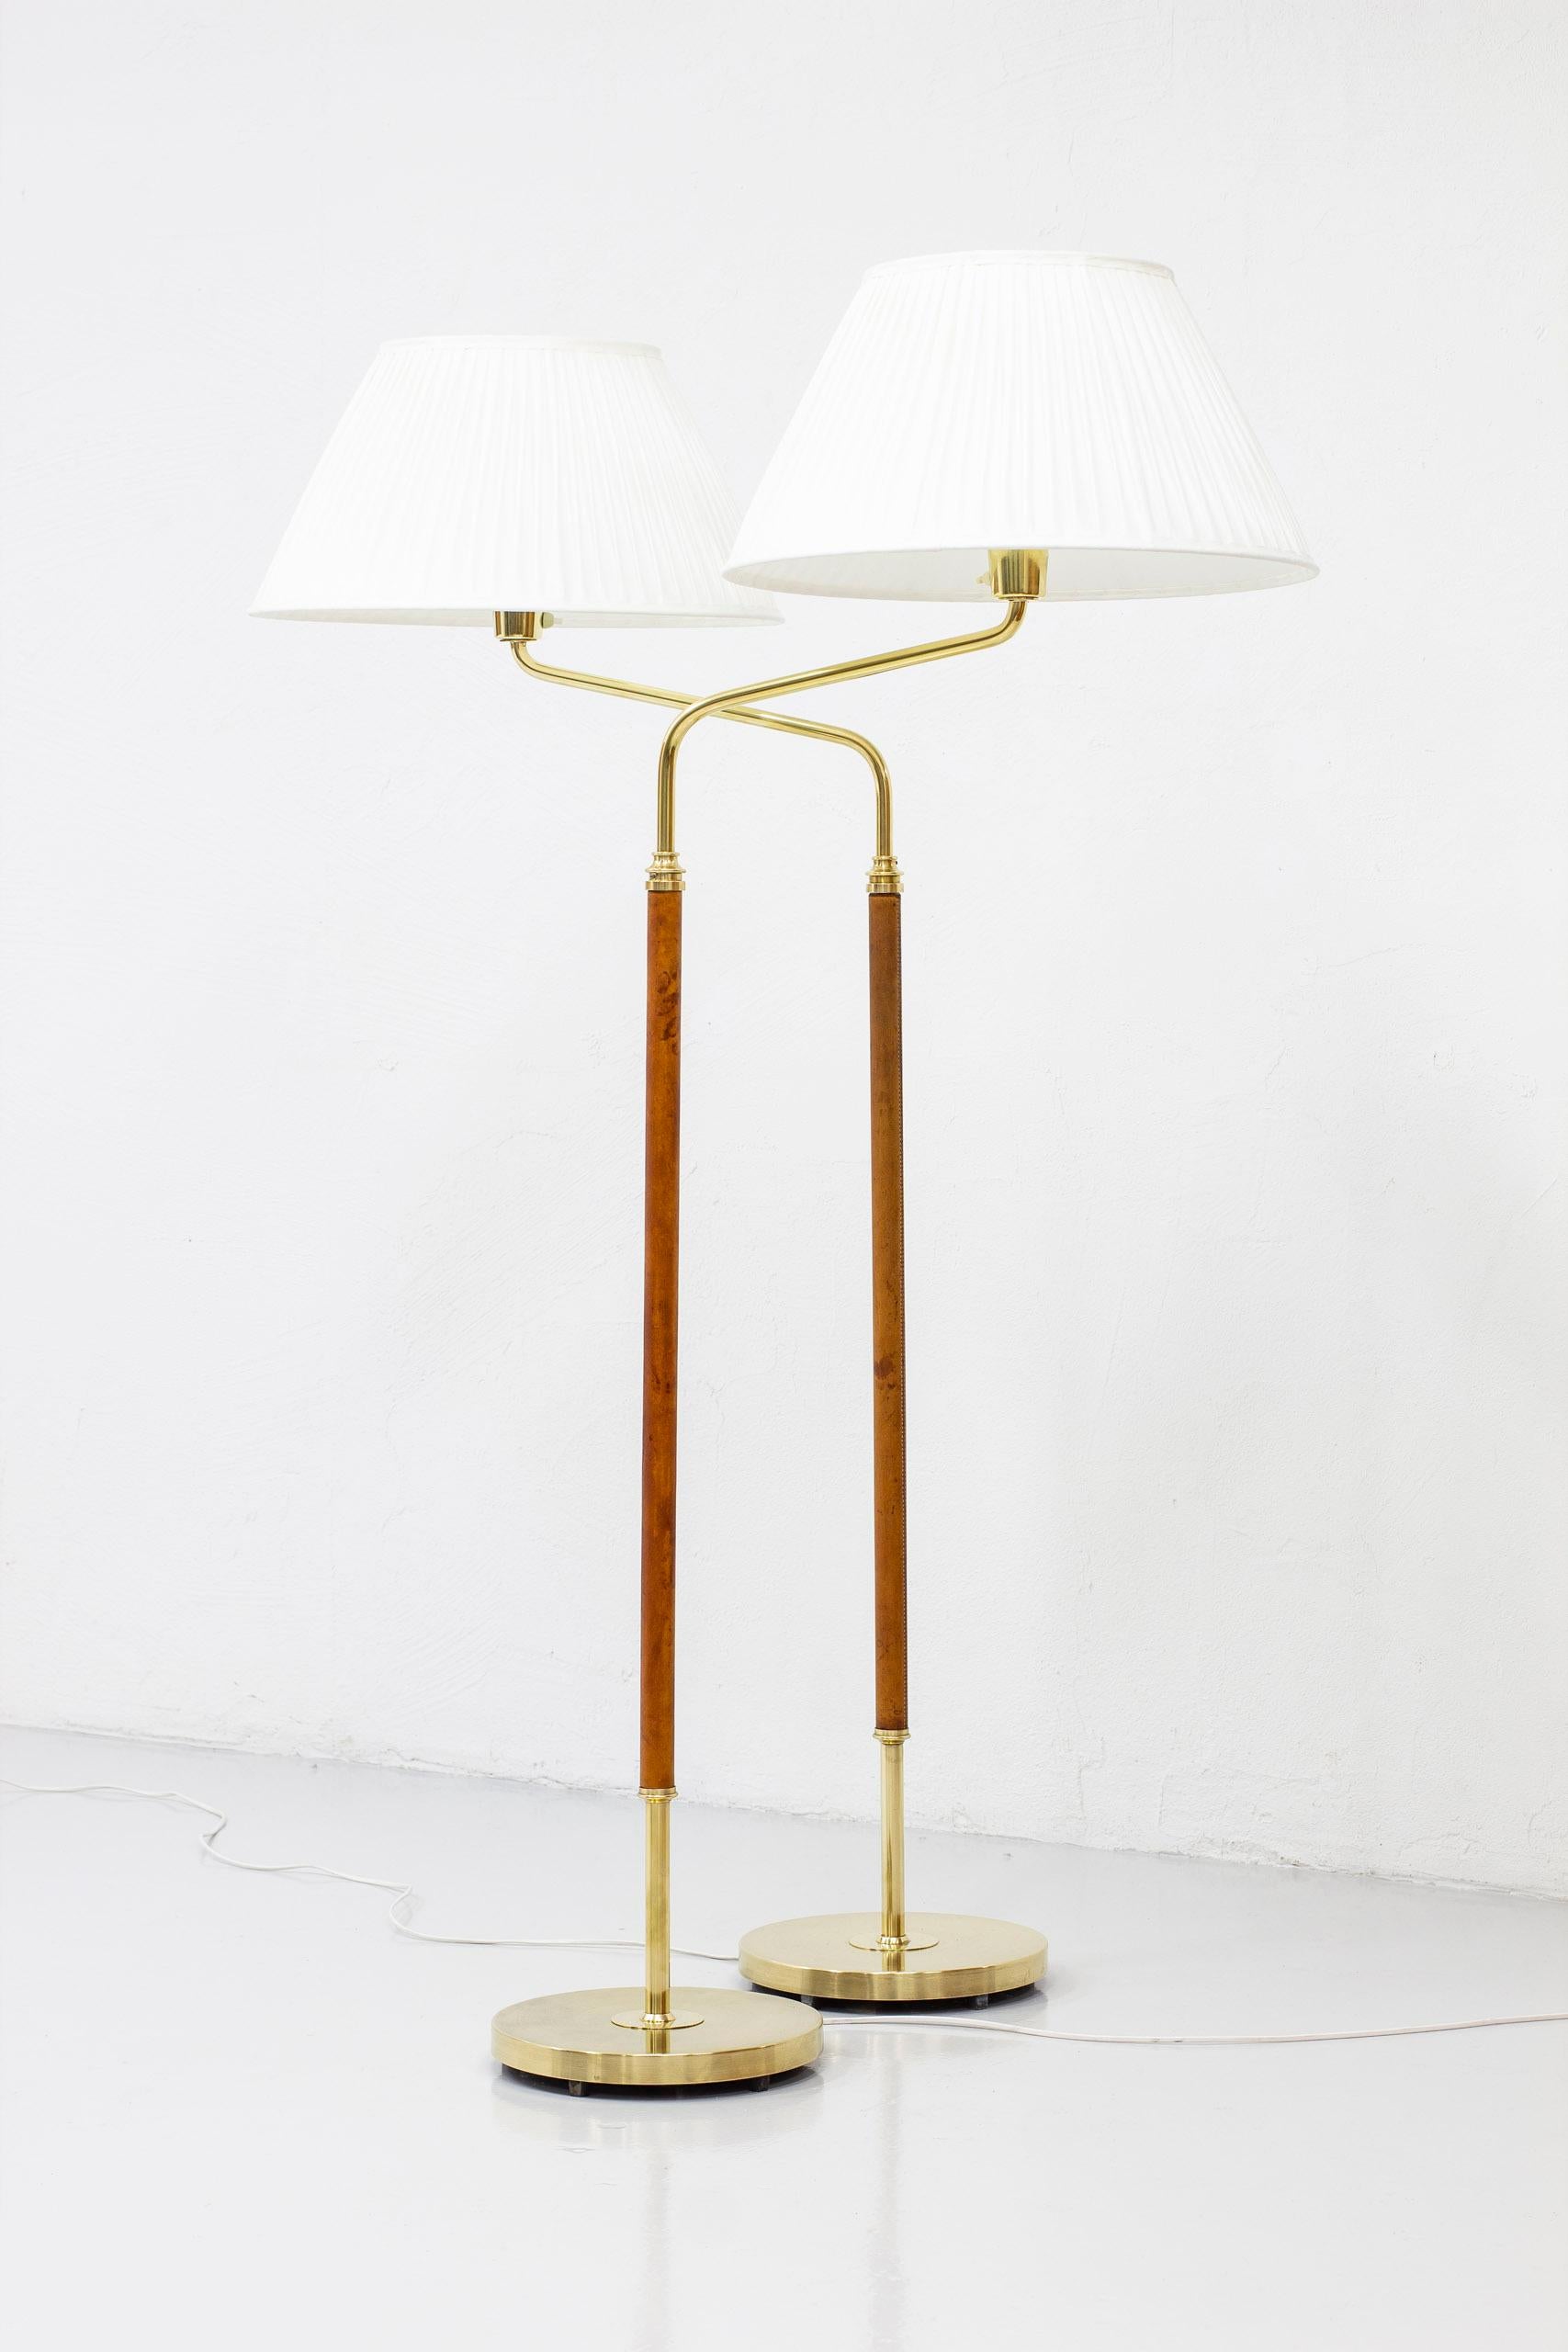 Pair of floor lamps model 31644 designed by Bertil Brisborg. Produced by Nordiska Kompaniet from 1947-1950s. Made from brass, cast iron and with original cognac colored leather. New creme colored chintz shade with hand sewn pleating. Light switch on